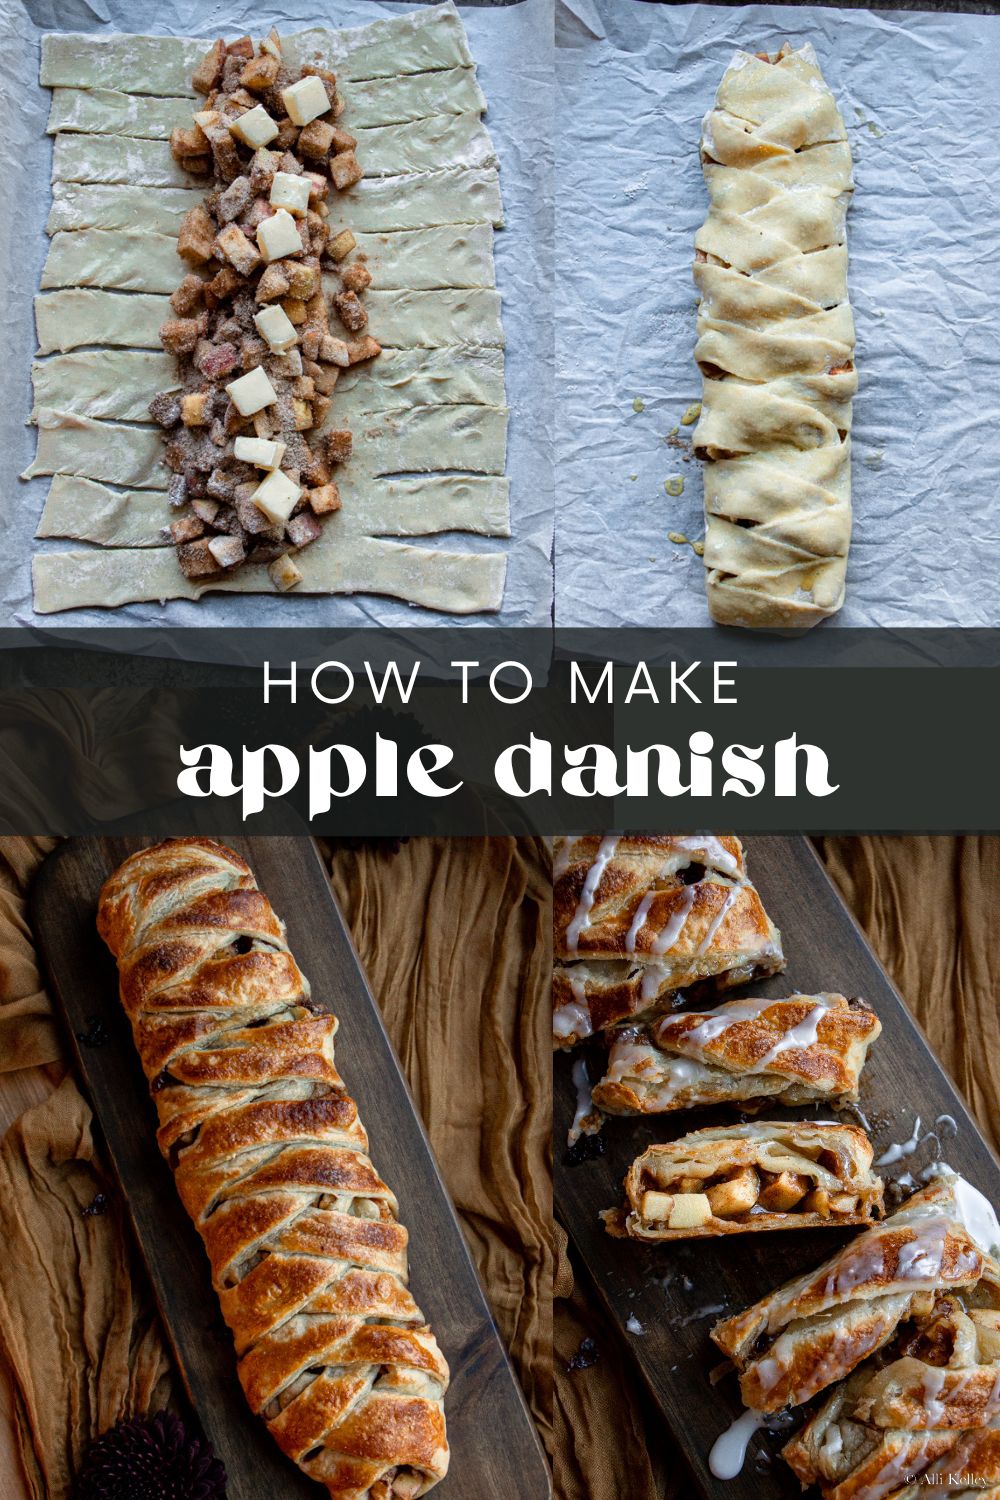 My easy apple danish recipe is full of delicious flavor, all without any time-consuming prep! Every bite is filled with sweet apples, warming spices, and flaky puff pastry. It's the perfect breakfast or dessert for all the family!